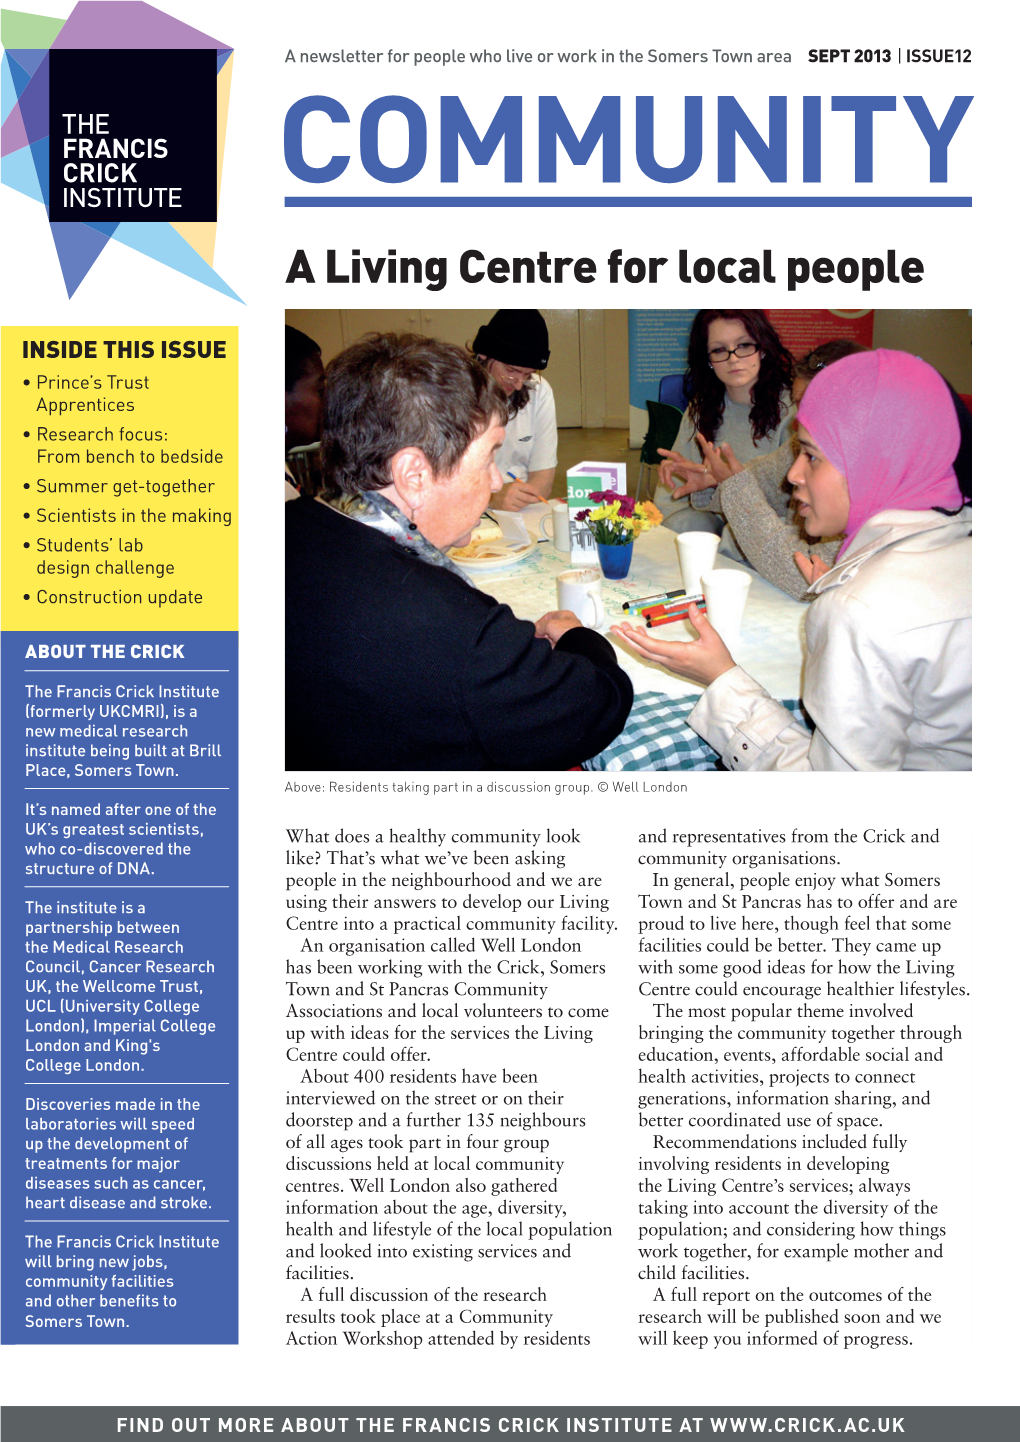 A Living Centre for Local People